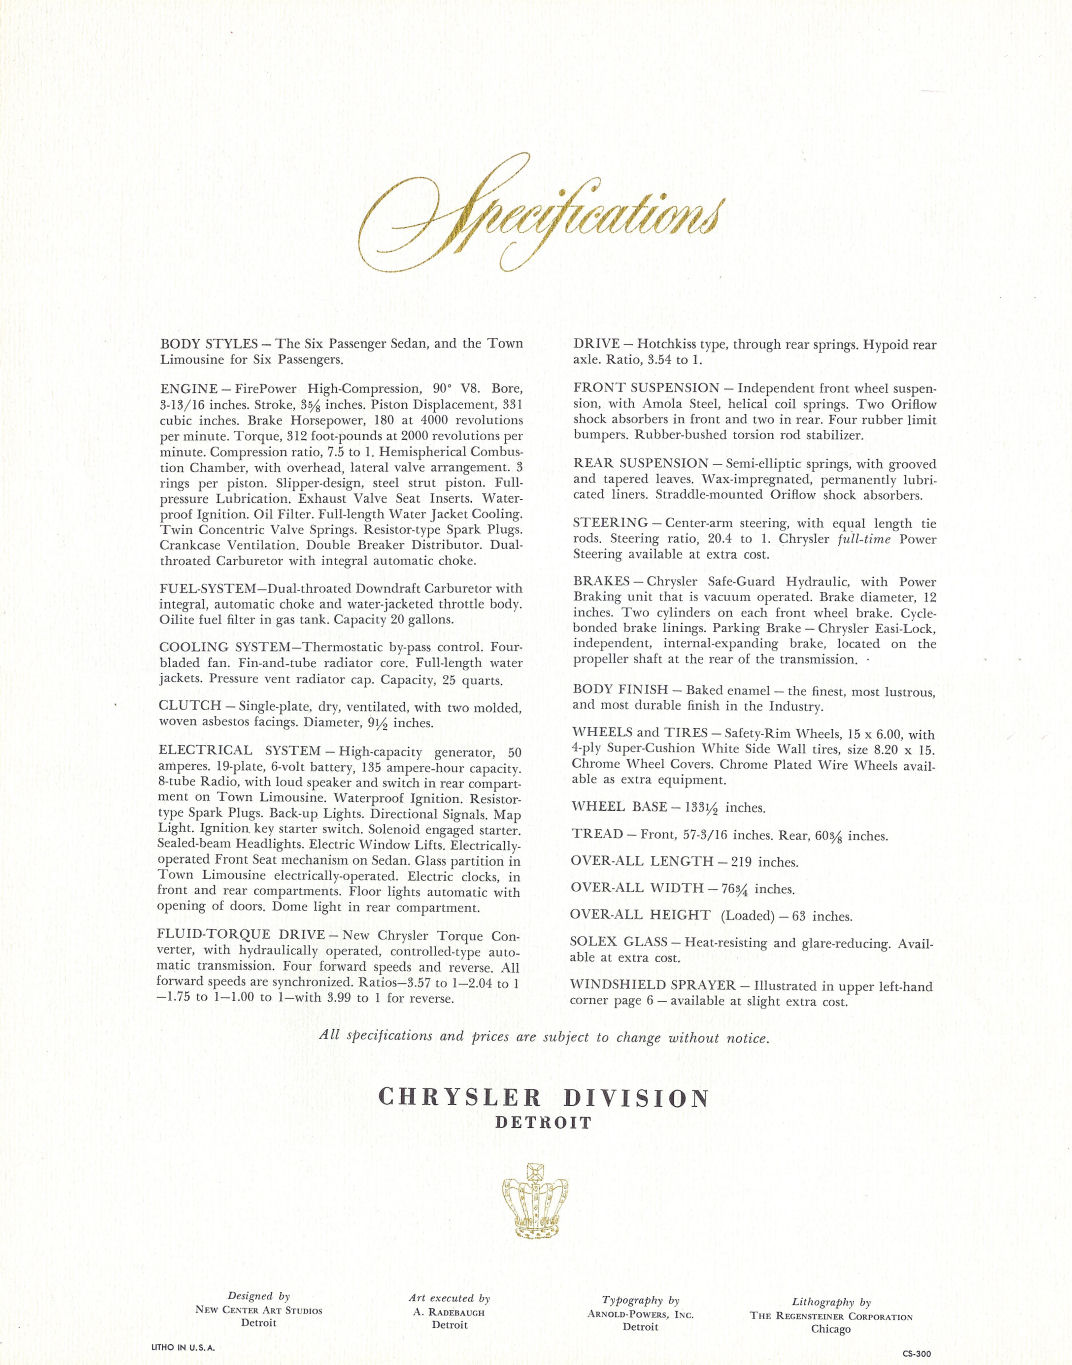 1953 Chrysler Imperial Brochure Page 8